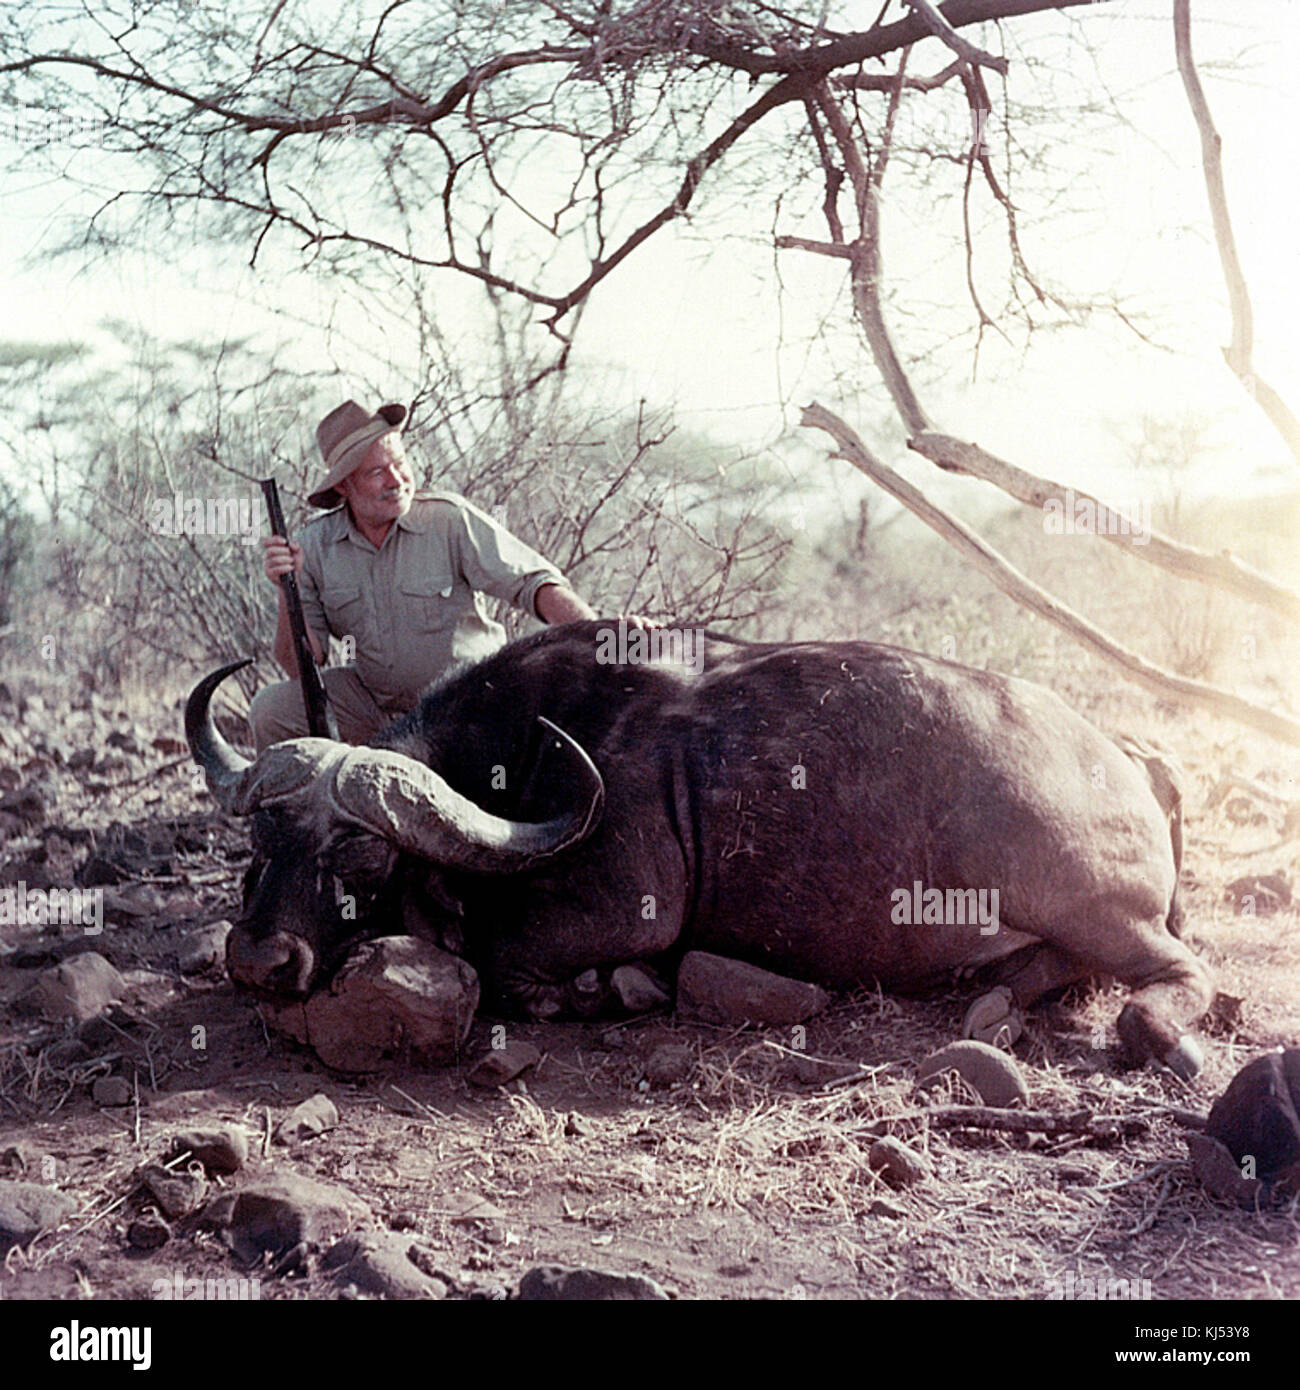 Ernest Hemingway poses with water buffalo, Africa, 1953 Stock Photo